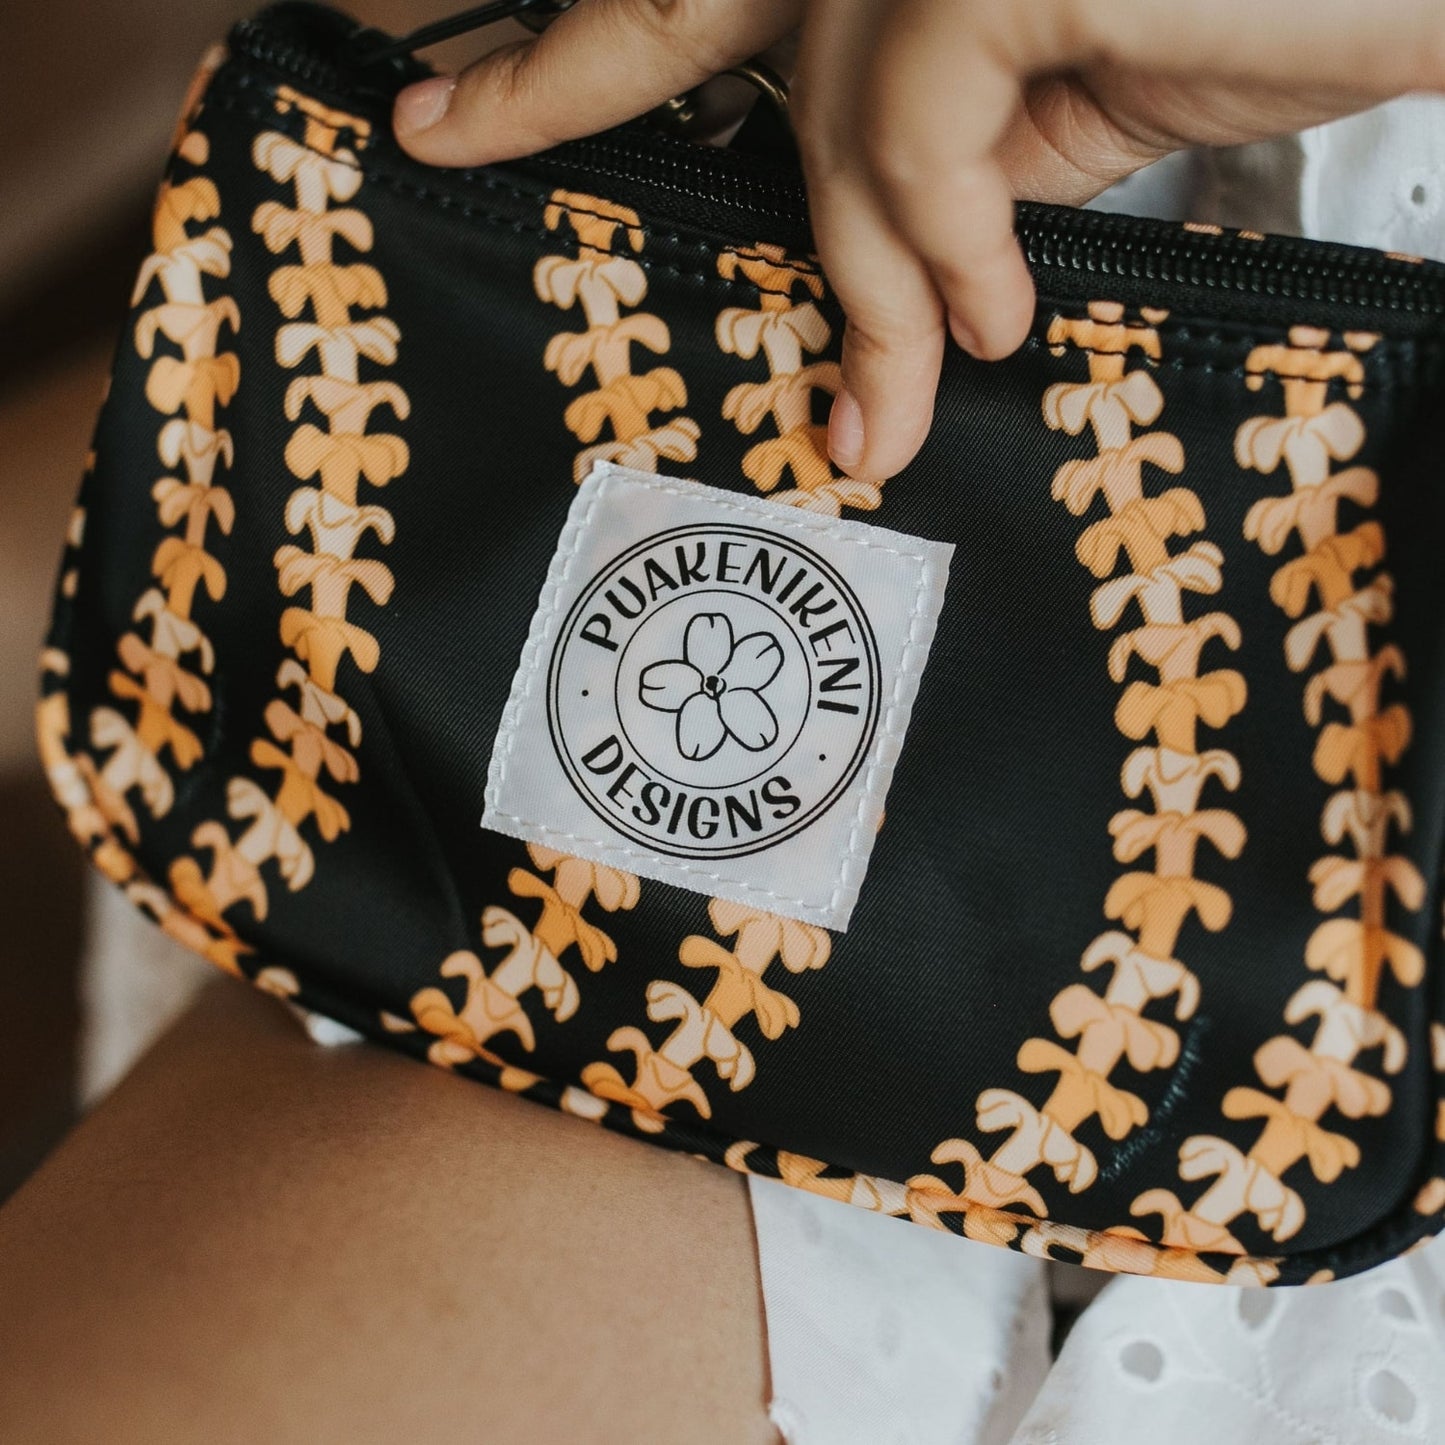 grab and go set includes mini zipper pouch and wristlet key fob in kaulua black orange lei - from Puakenikeni Designs - model holding